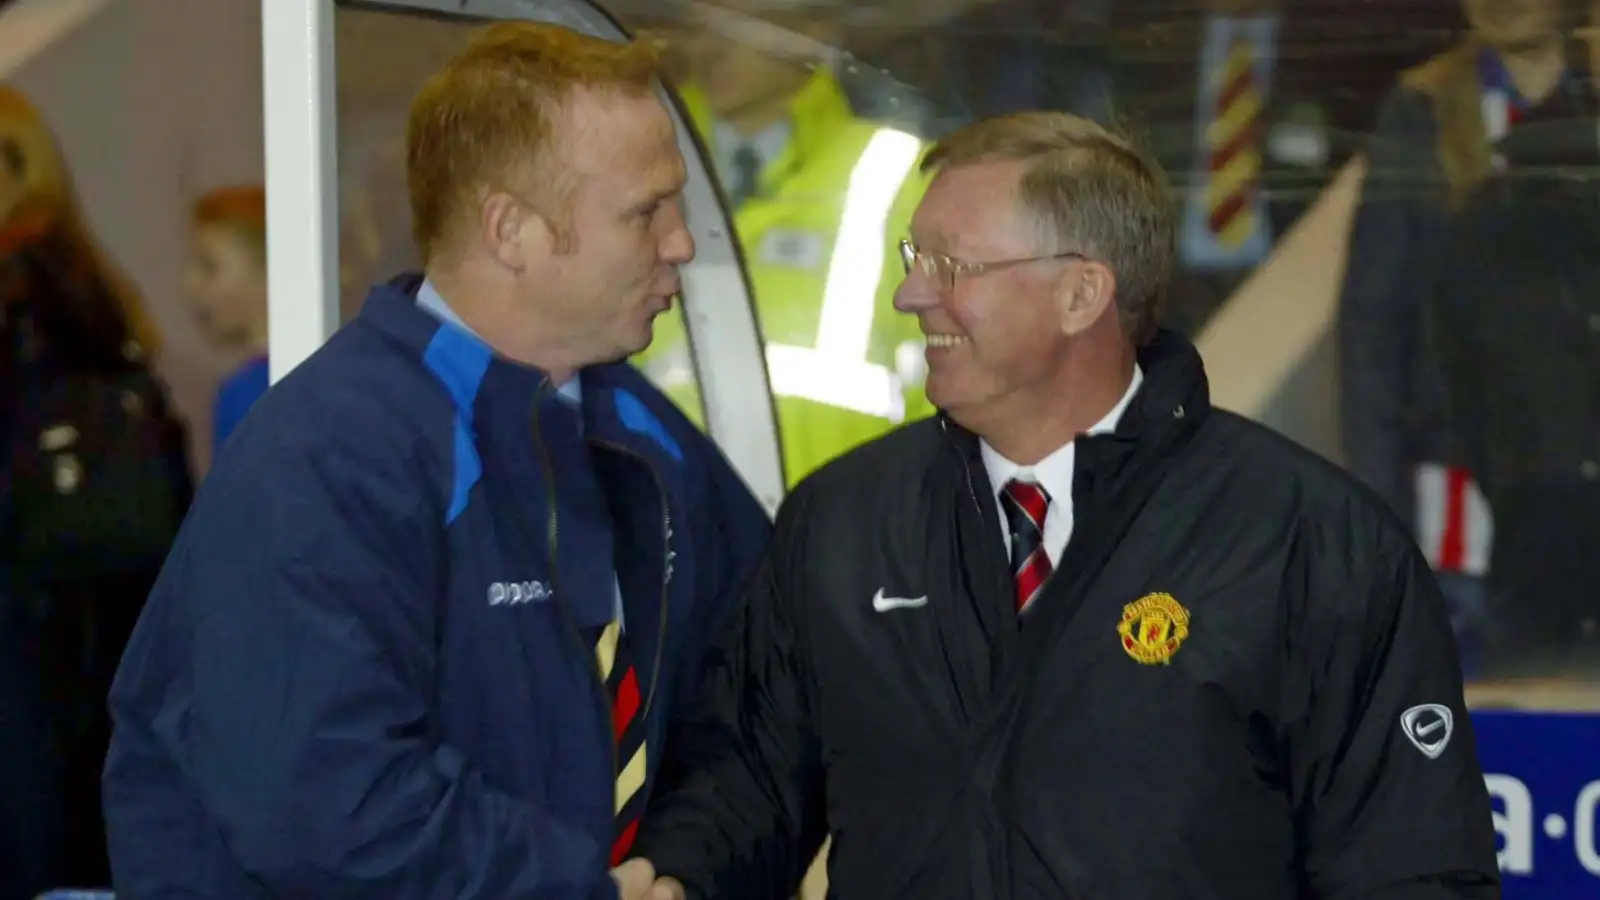 Alex McLeish shakes hands with Sir Alex Ferguson before a Champions League match between Rangers and Manchester United.